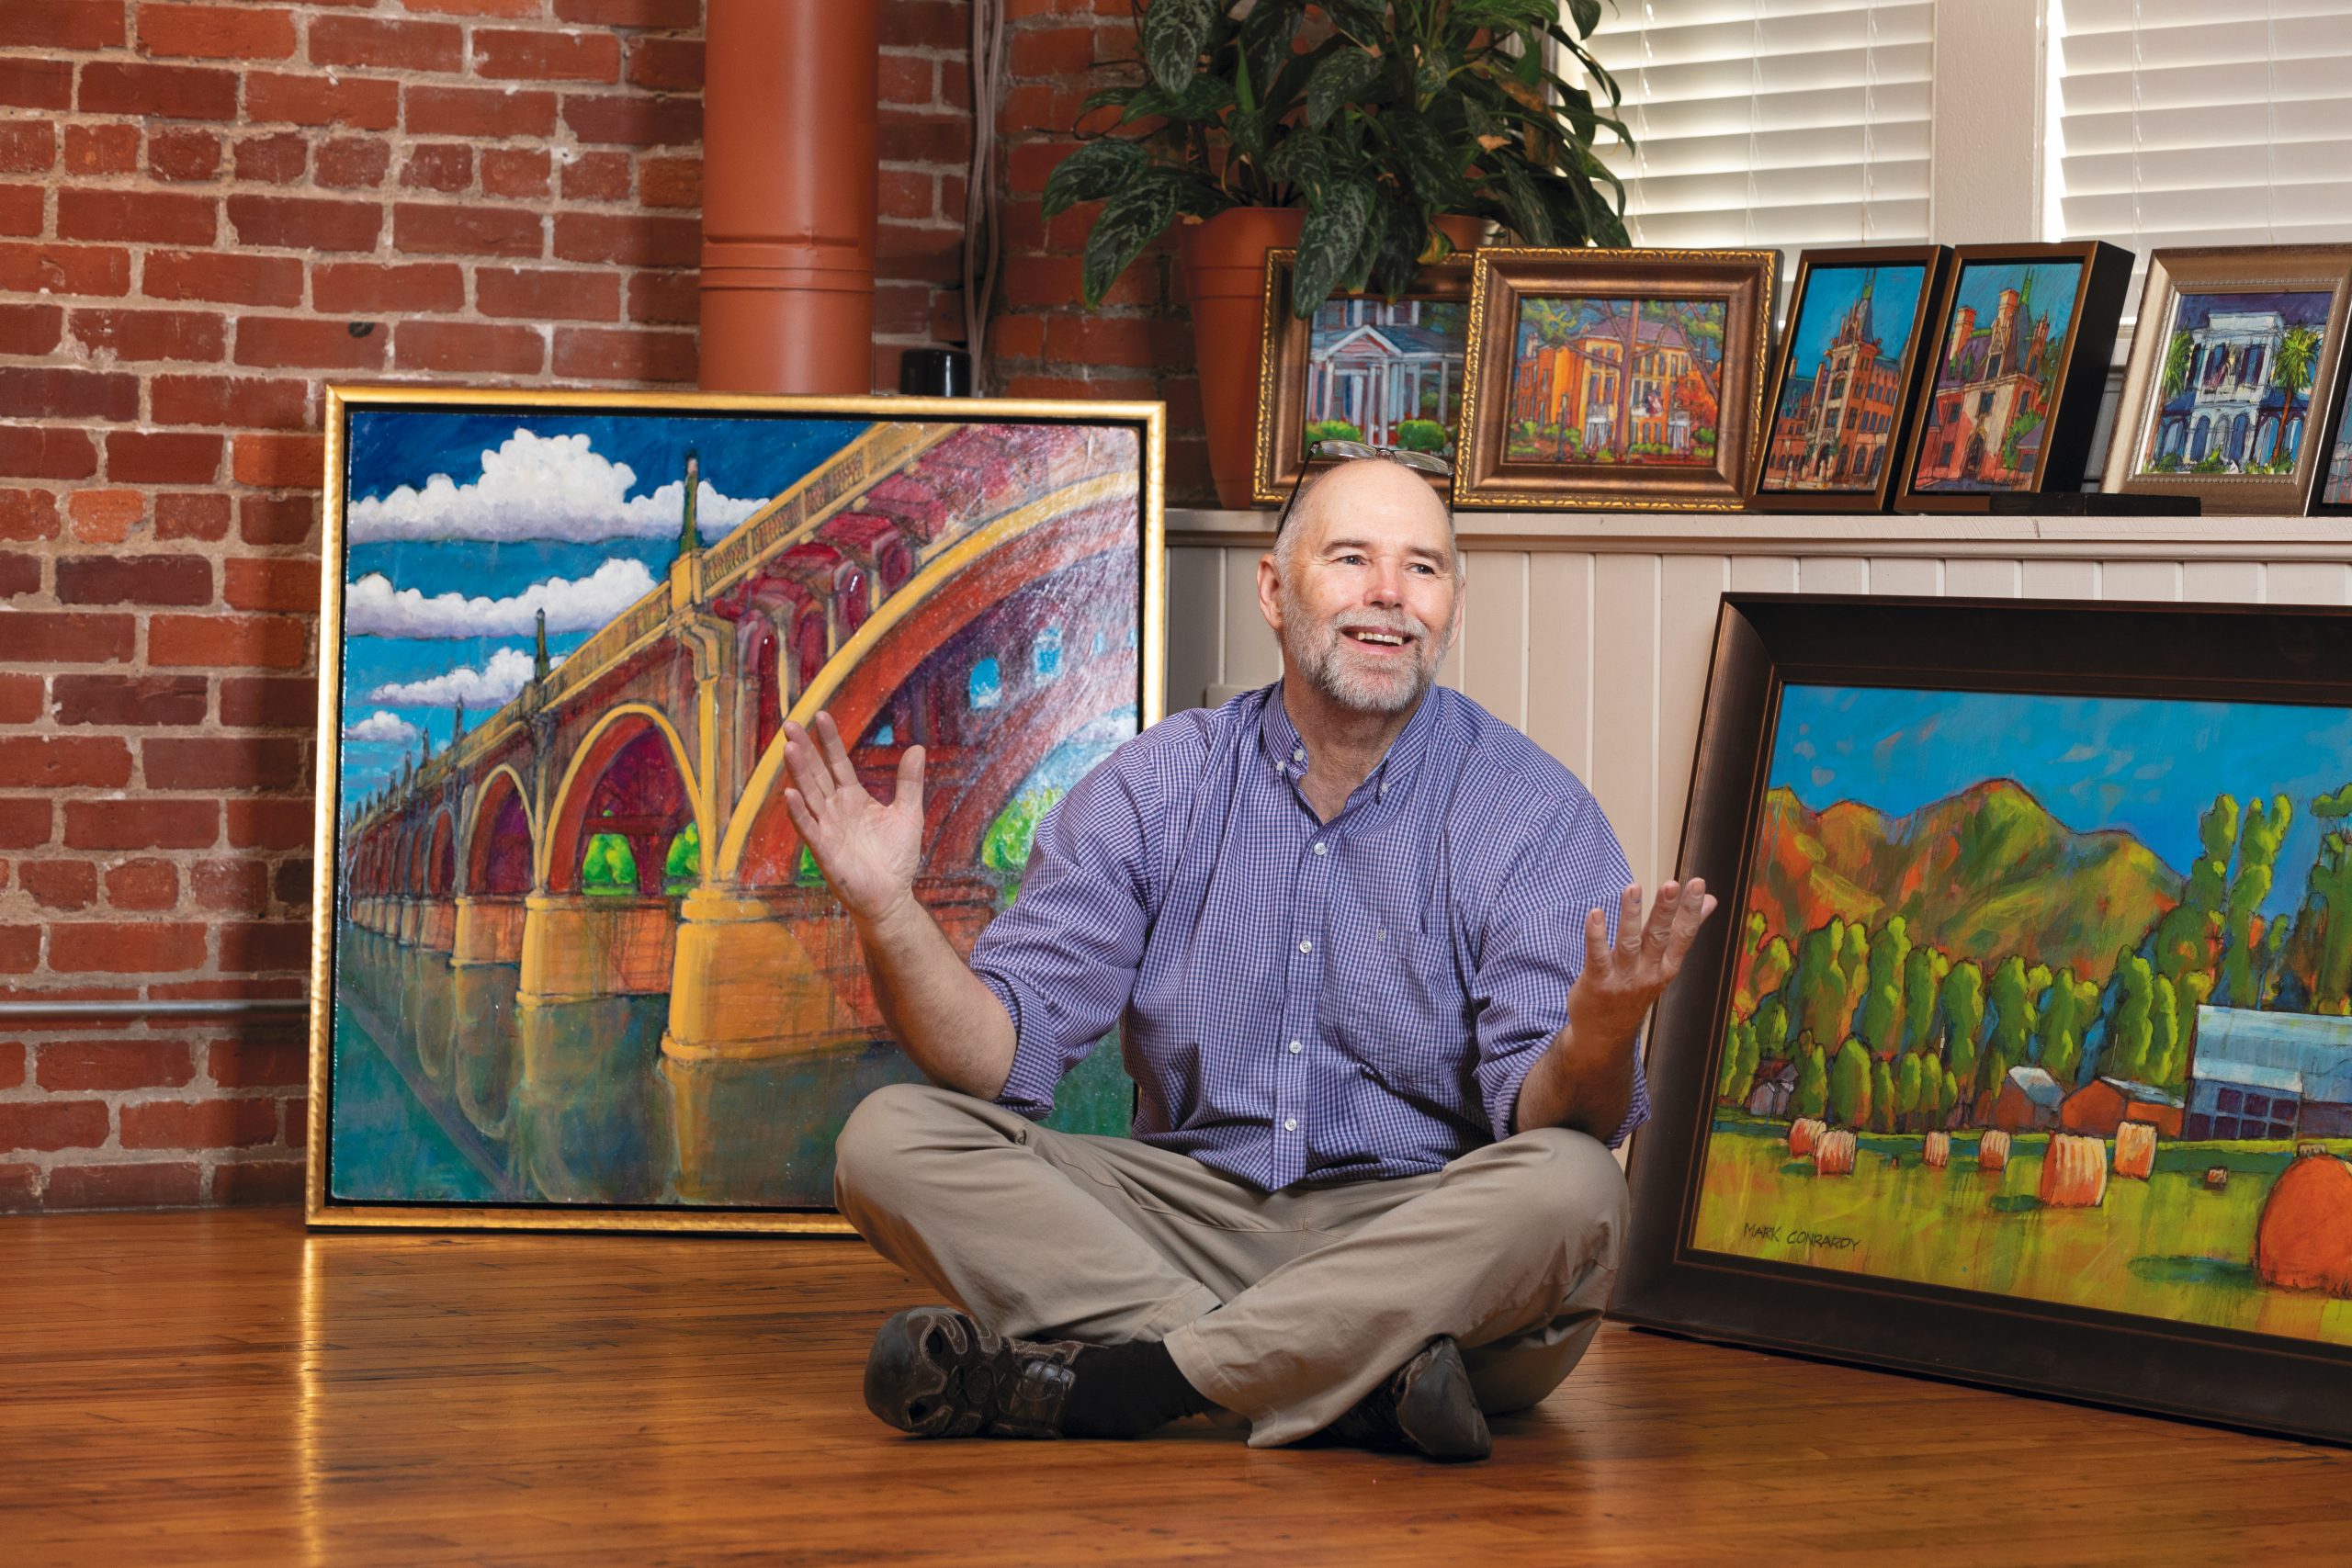  Mark Conrardy, a graphic artist at the S.C. Department of Natural Resources, used his talents as an illustrator to transition into becoming a painter.